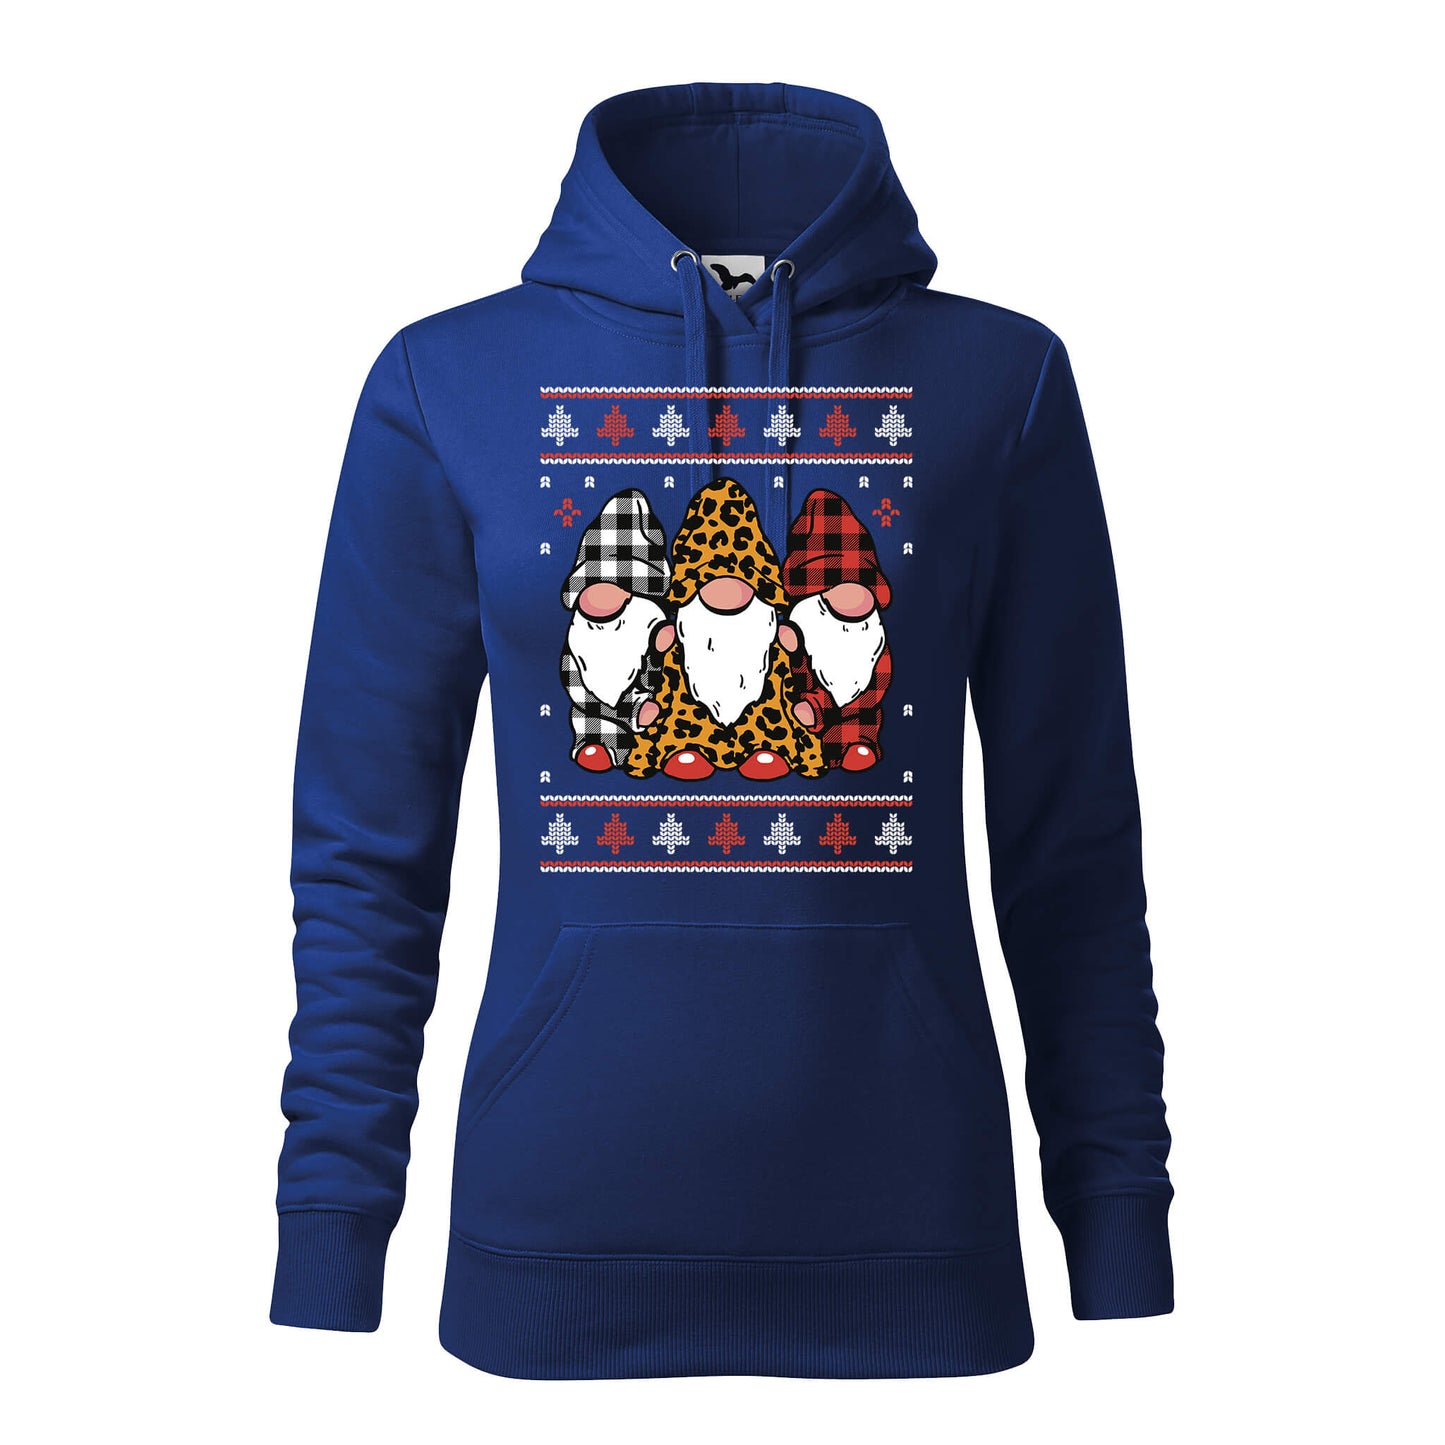 Gnome ugly hoodie - rvdesignprint